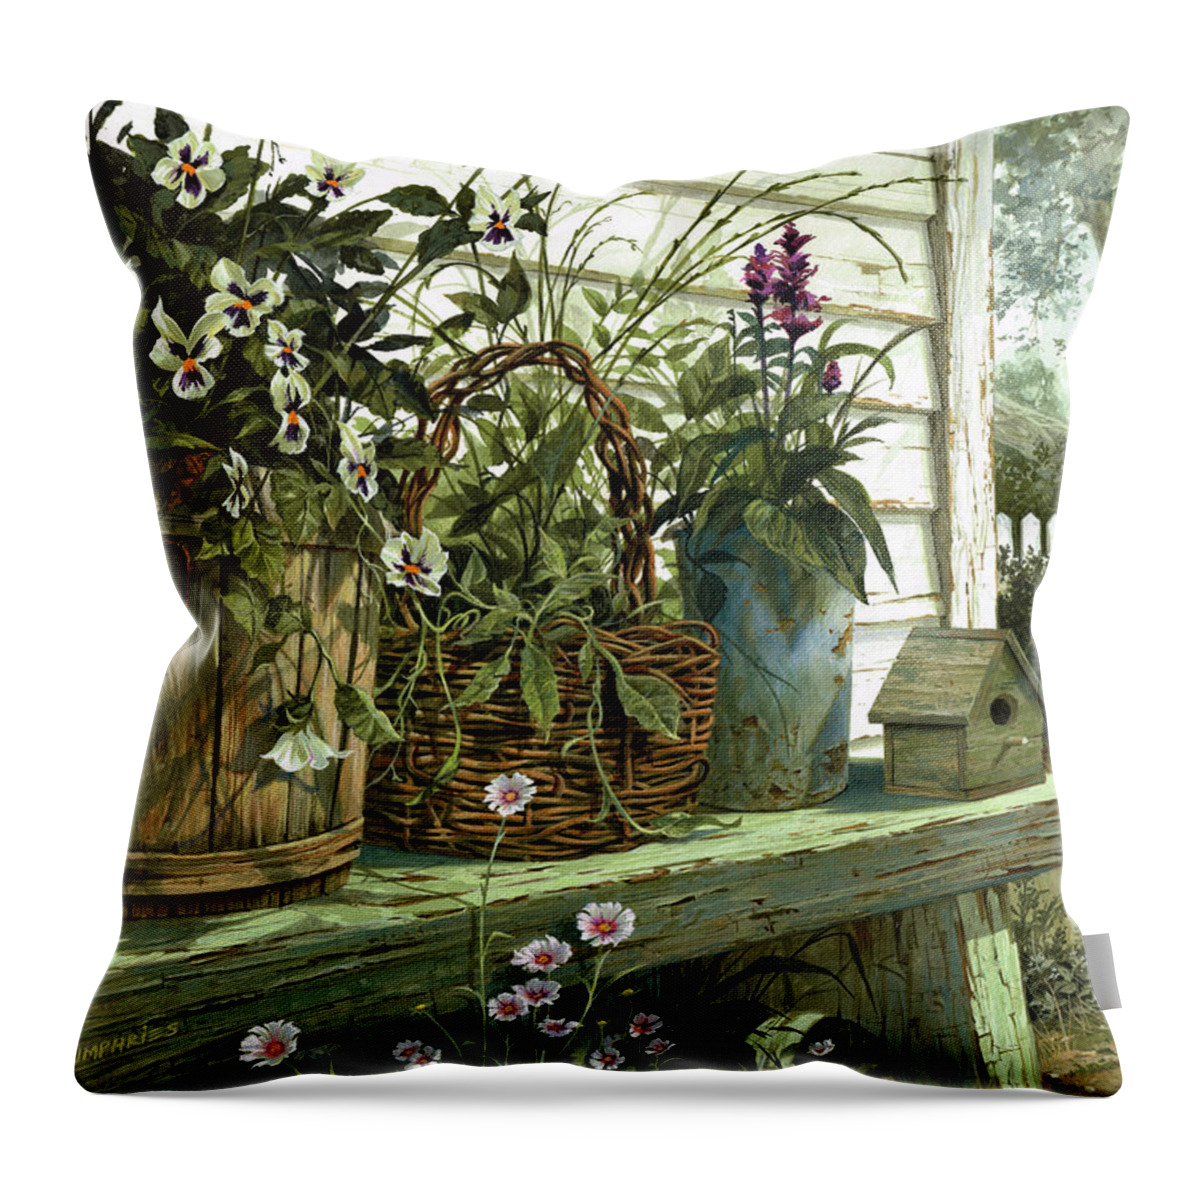 Michael Humphries Throw Pillow featuring the painting Spring Break by Michael Humphries